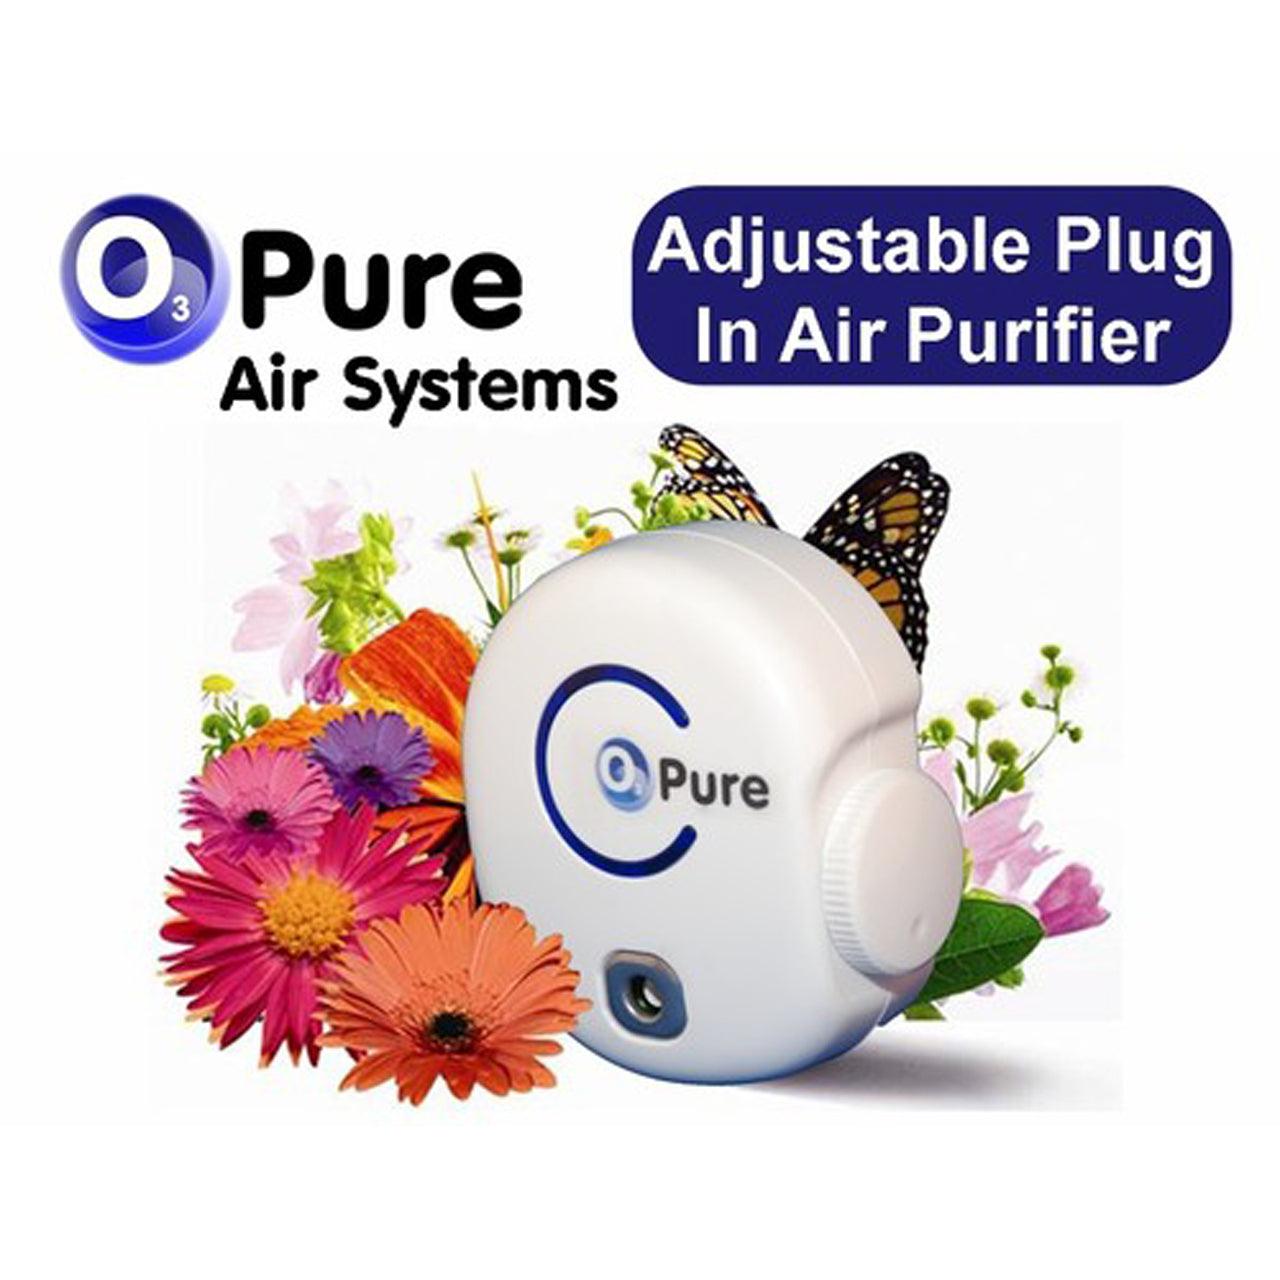 O3 PURE AAP 50 Plug-In Adjustable Air Purifier - O3 PURE